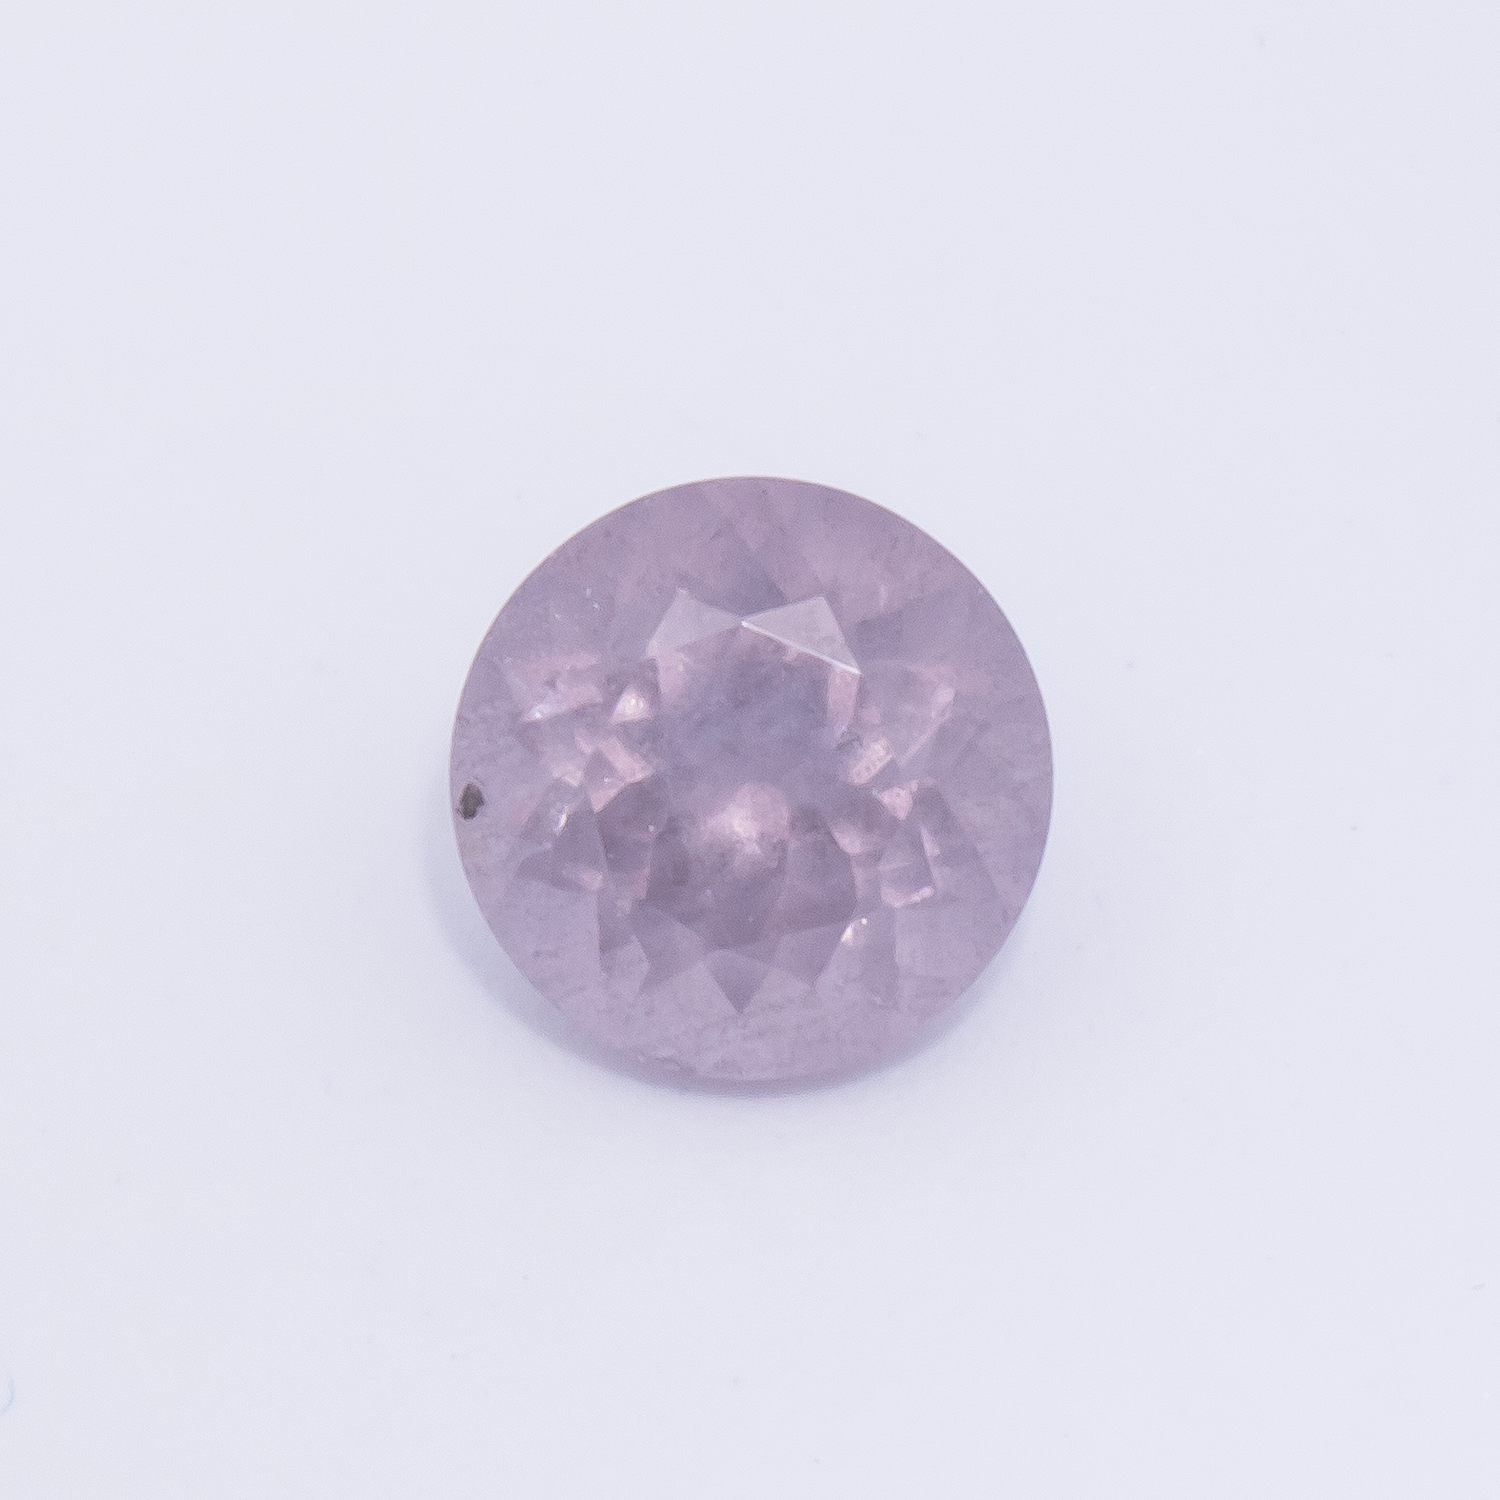 Spinell - lila, rund, 4.6x4.6 mm, 0.45 cts, Nr. SP90067